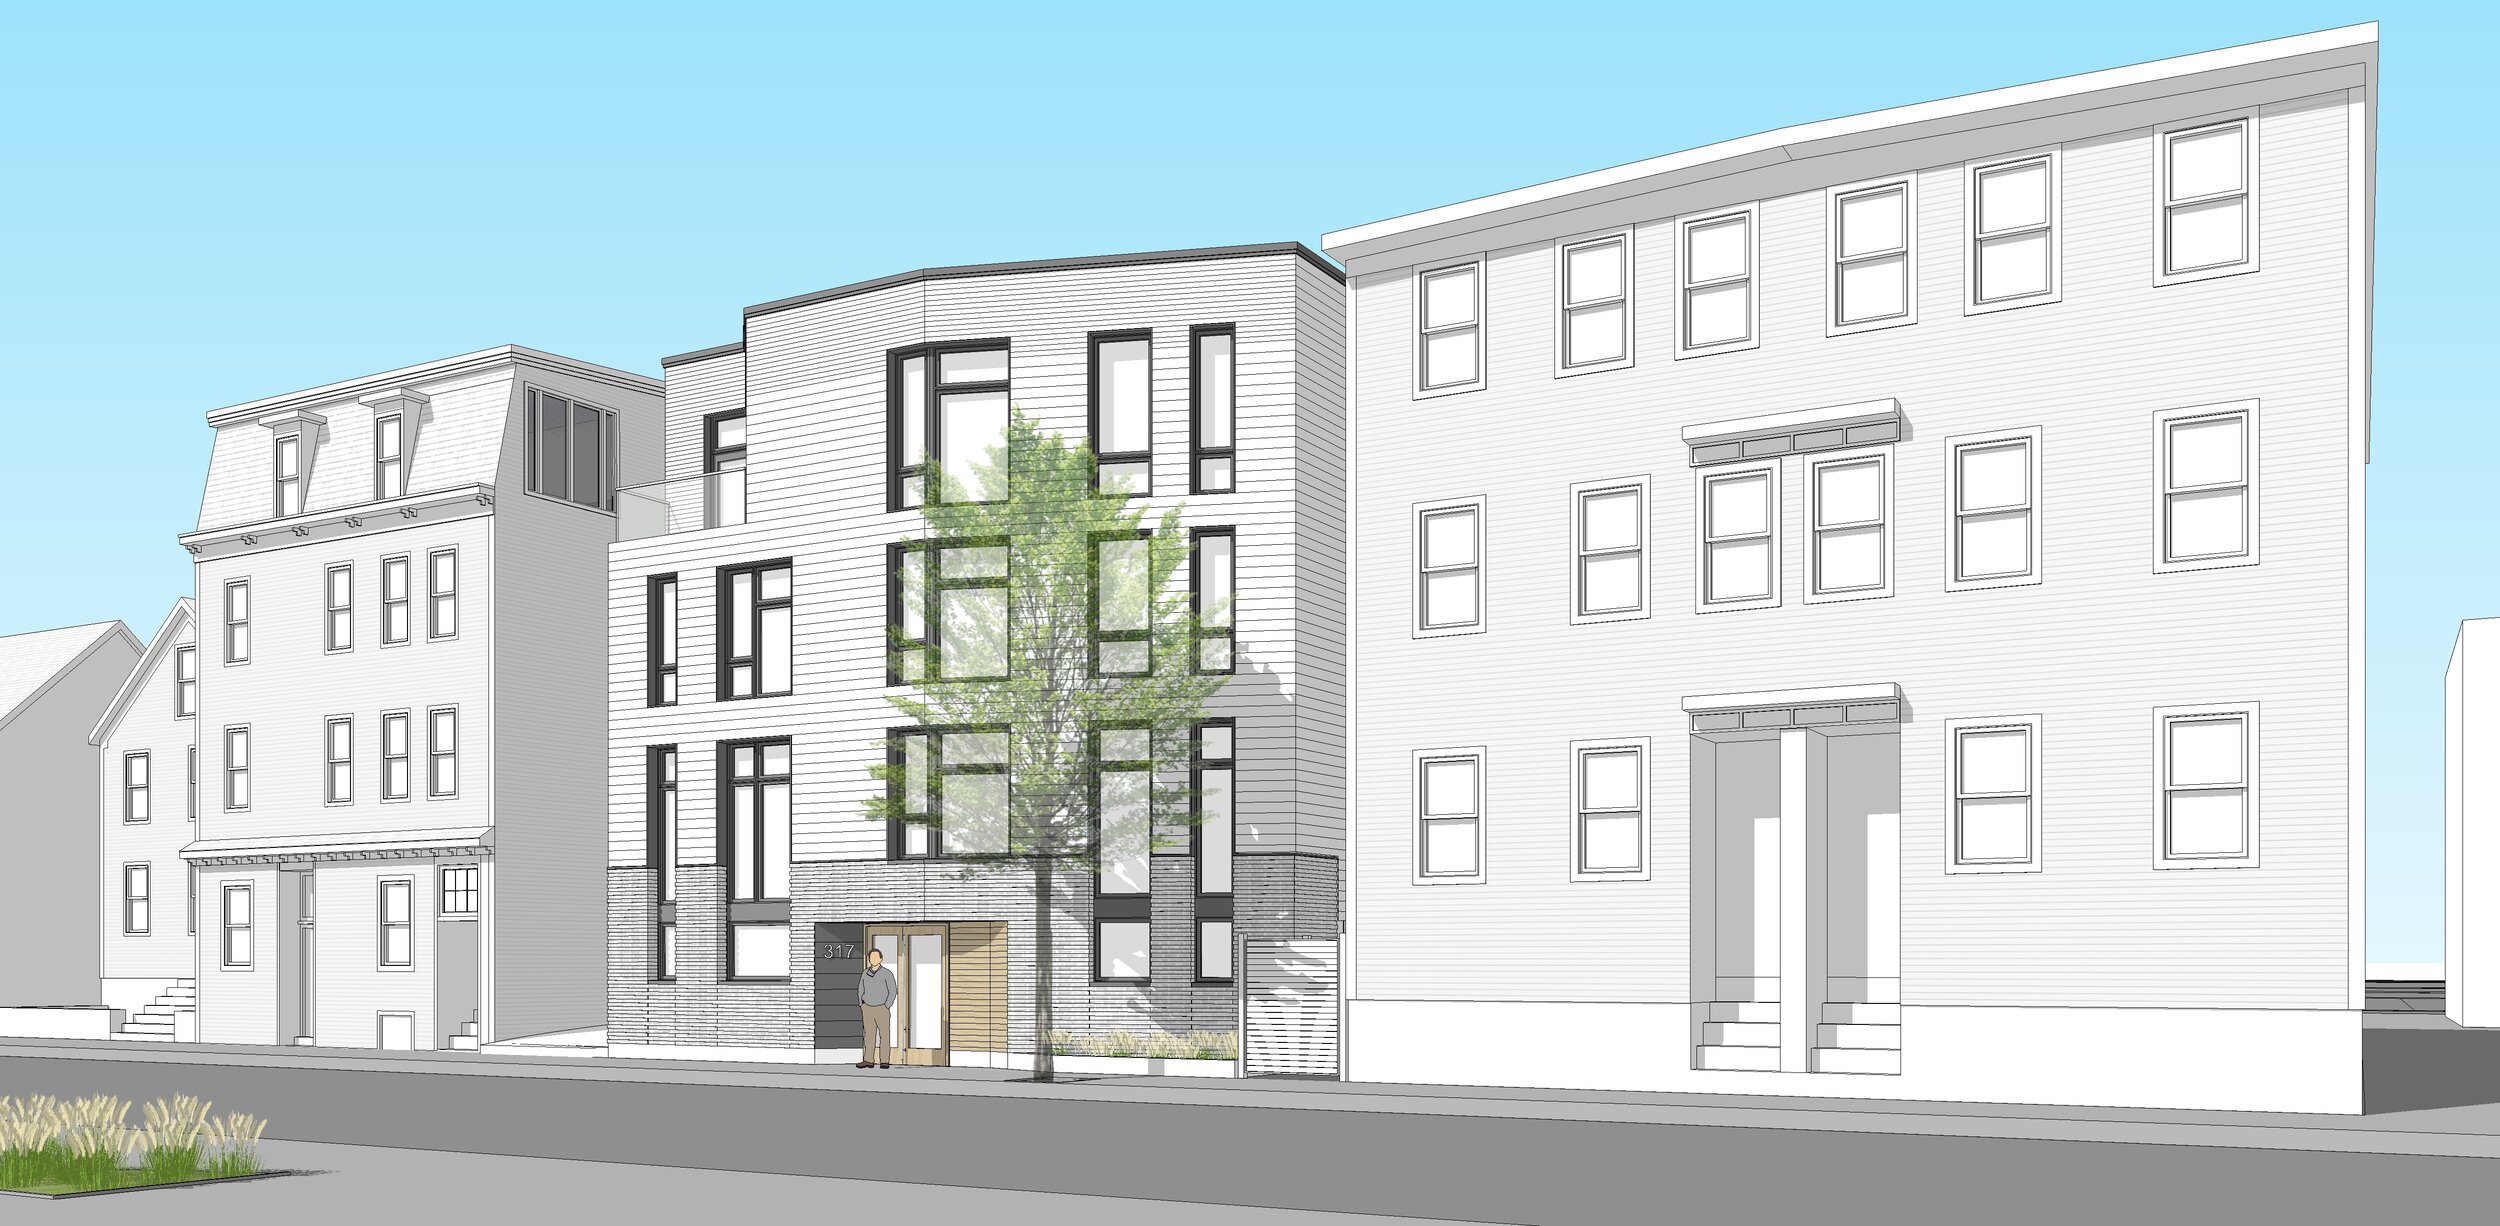 317 W 3rd_Proposed_View 2.jpg